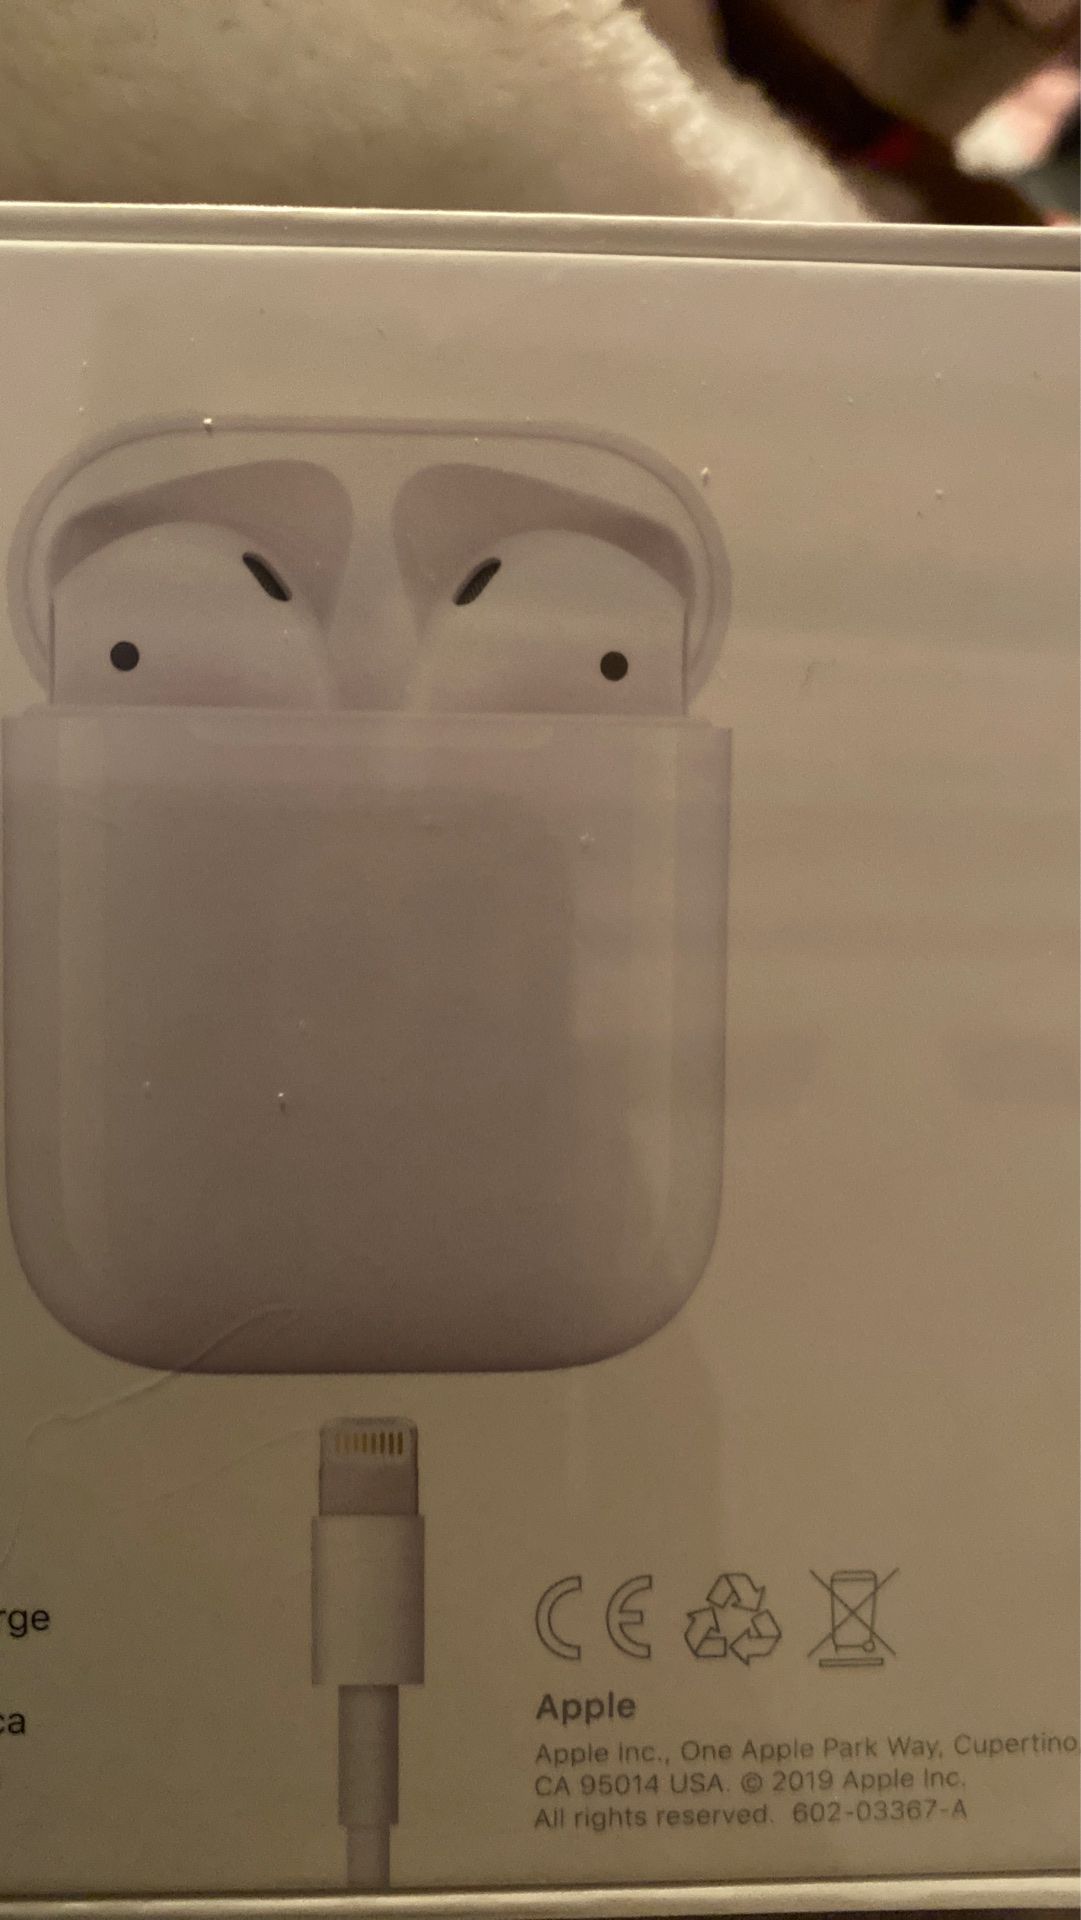 Brand new AirPods not open